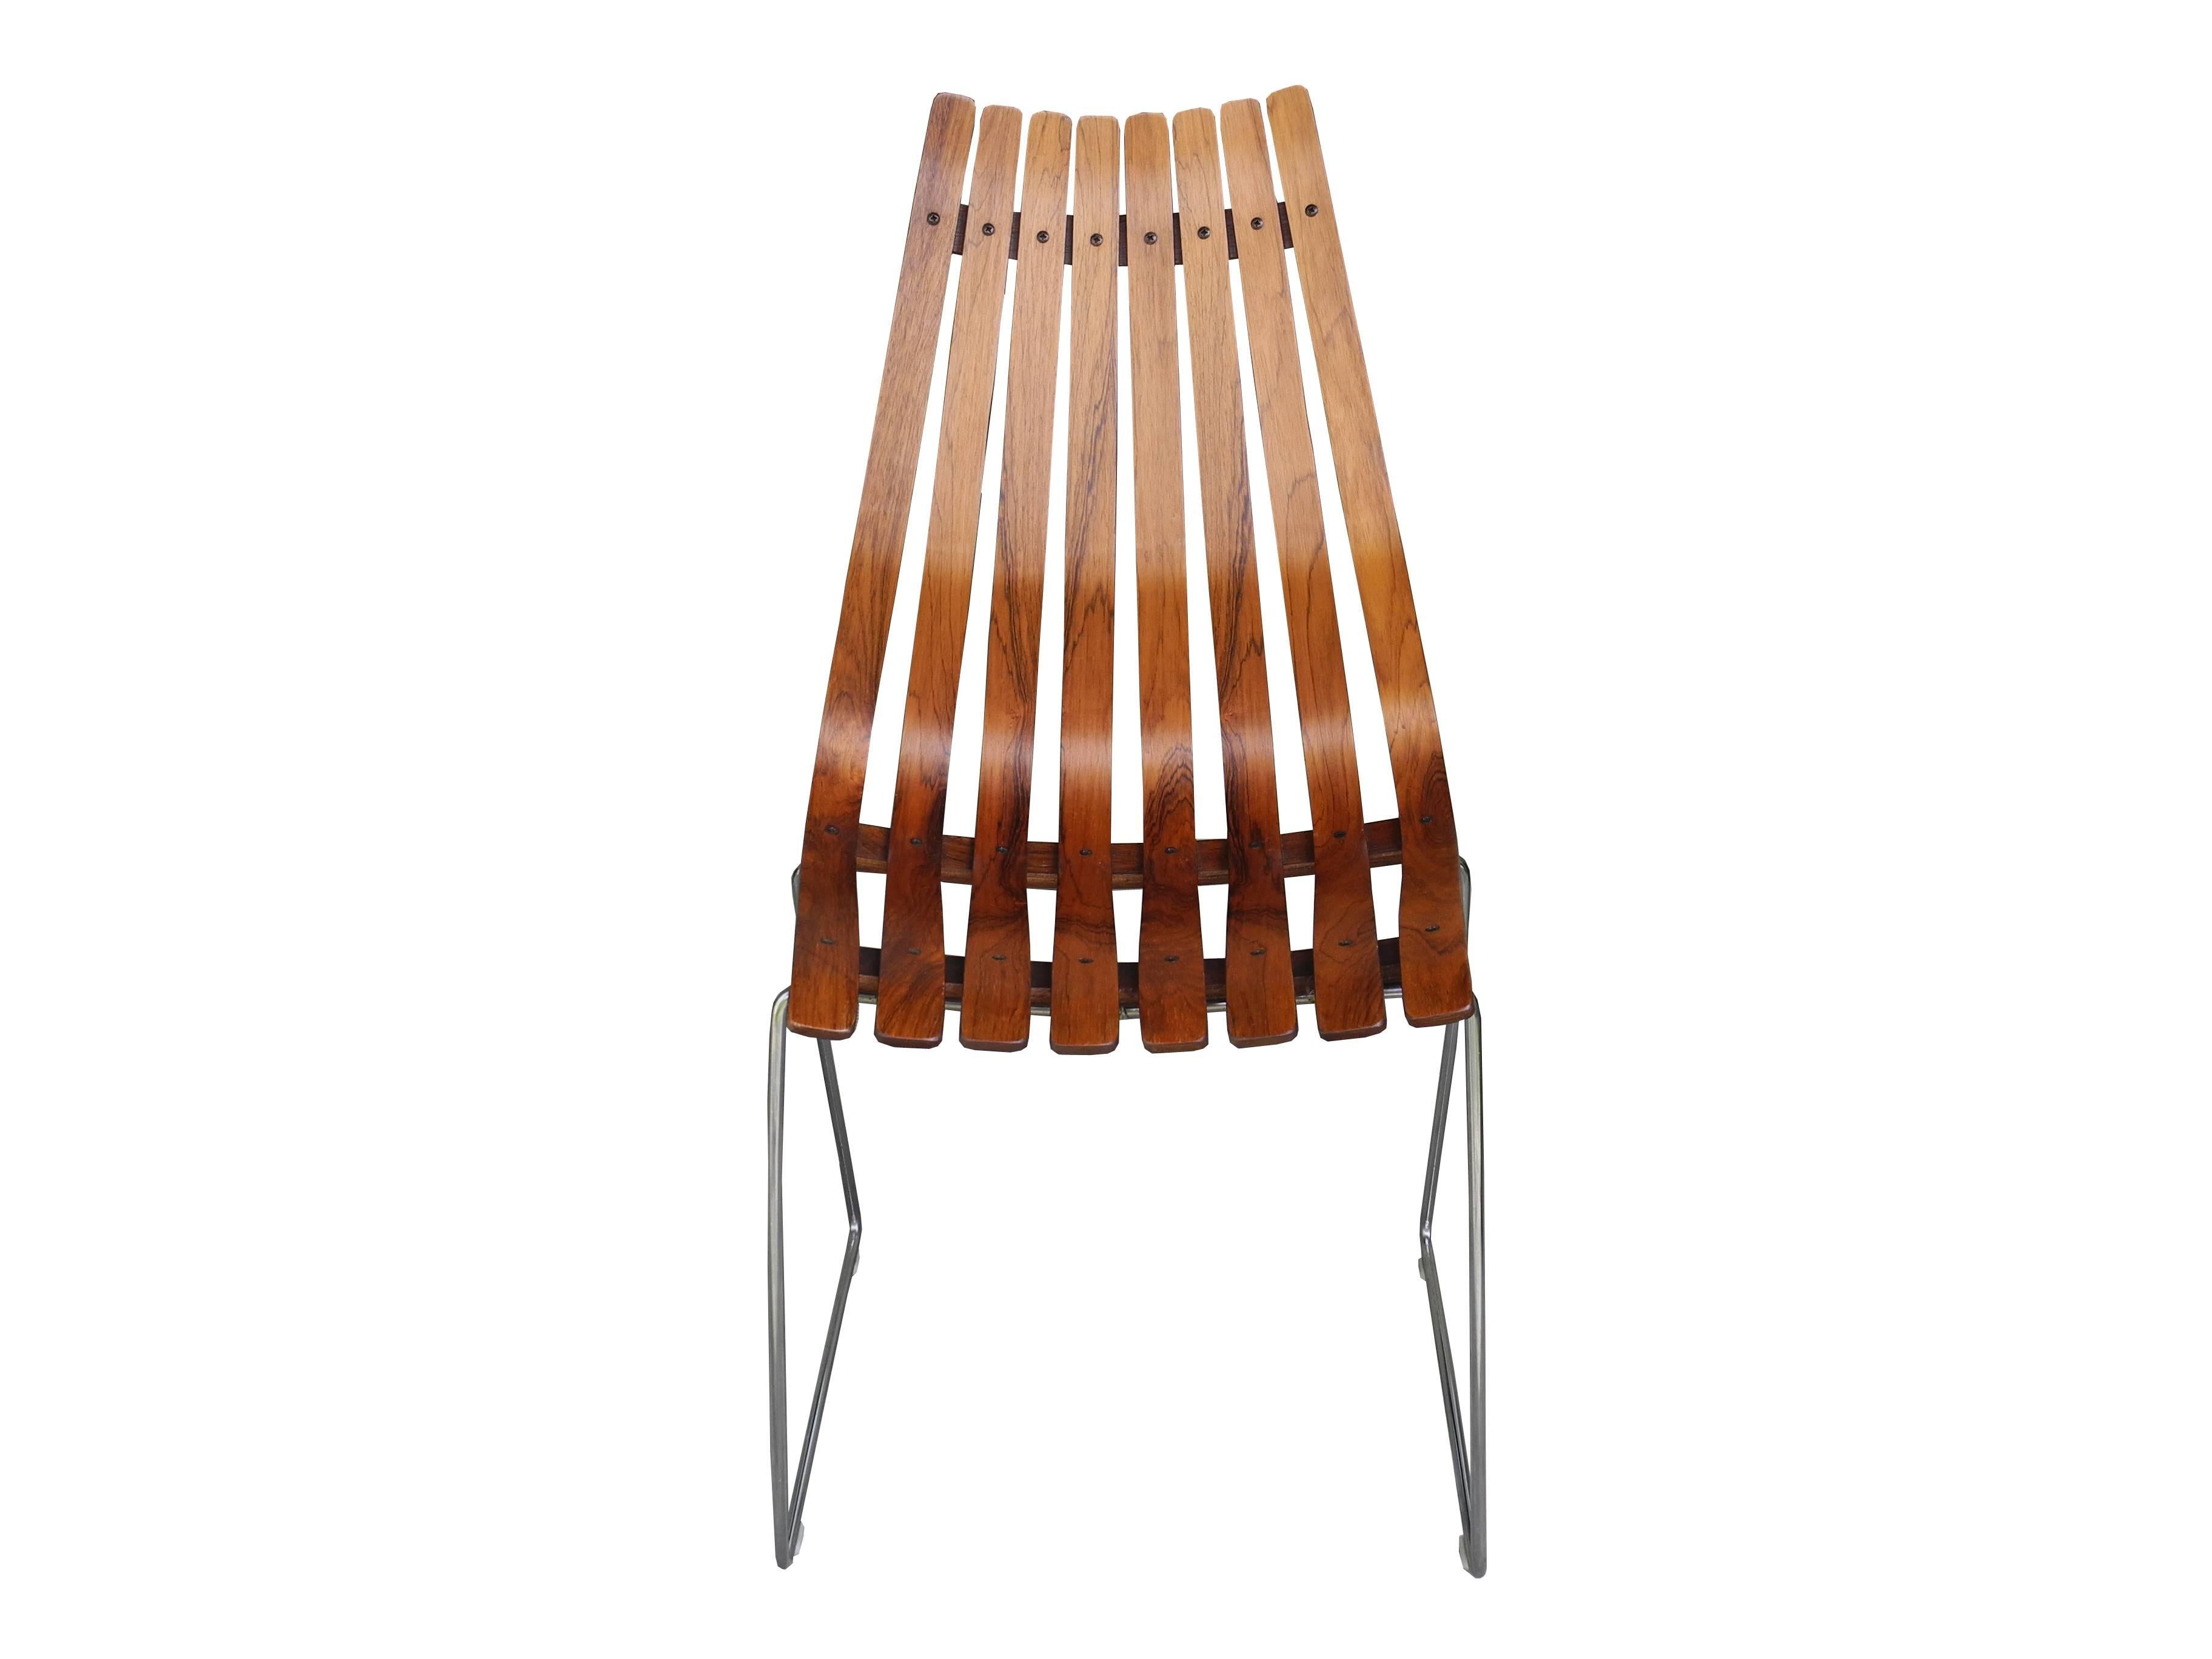 Scandinavian Modern Single Rosewood Slatted Norwegian Chair by Hans Brattrud for Hove Mobler For Sale